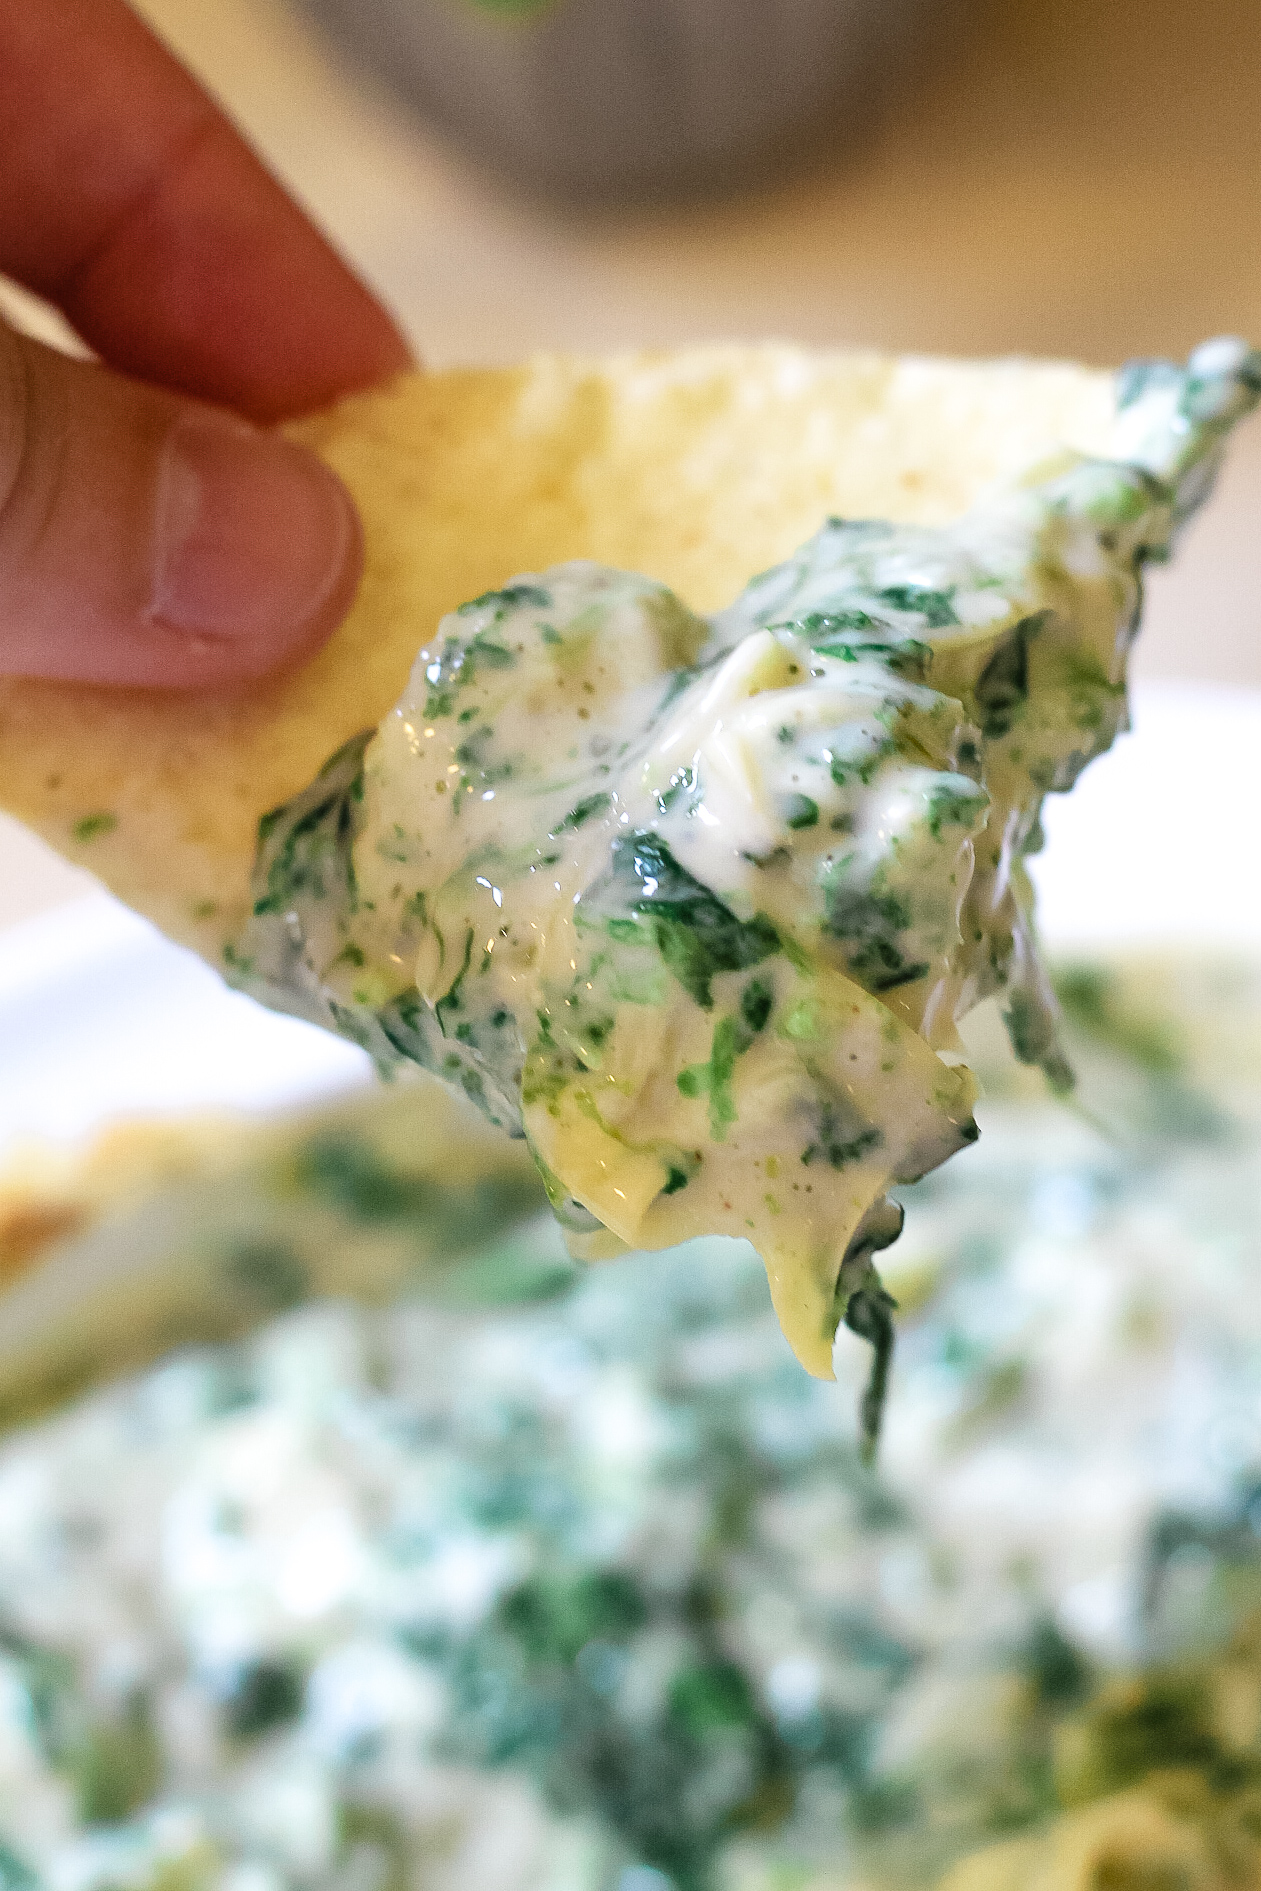 Tortilla chip dipped in 3 ingredient spinach and artichoke dip being held by a non-descript hand